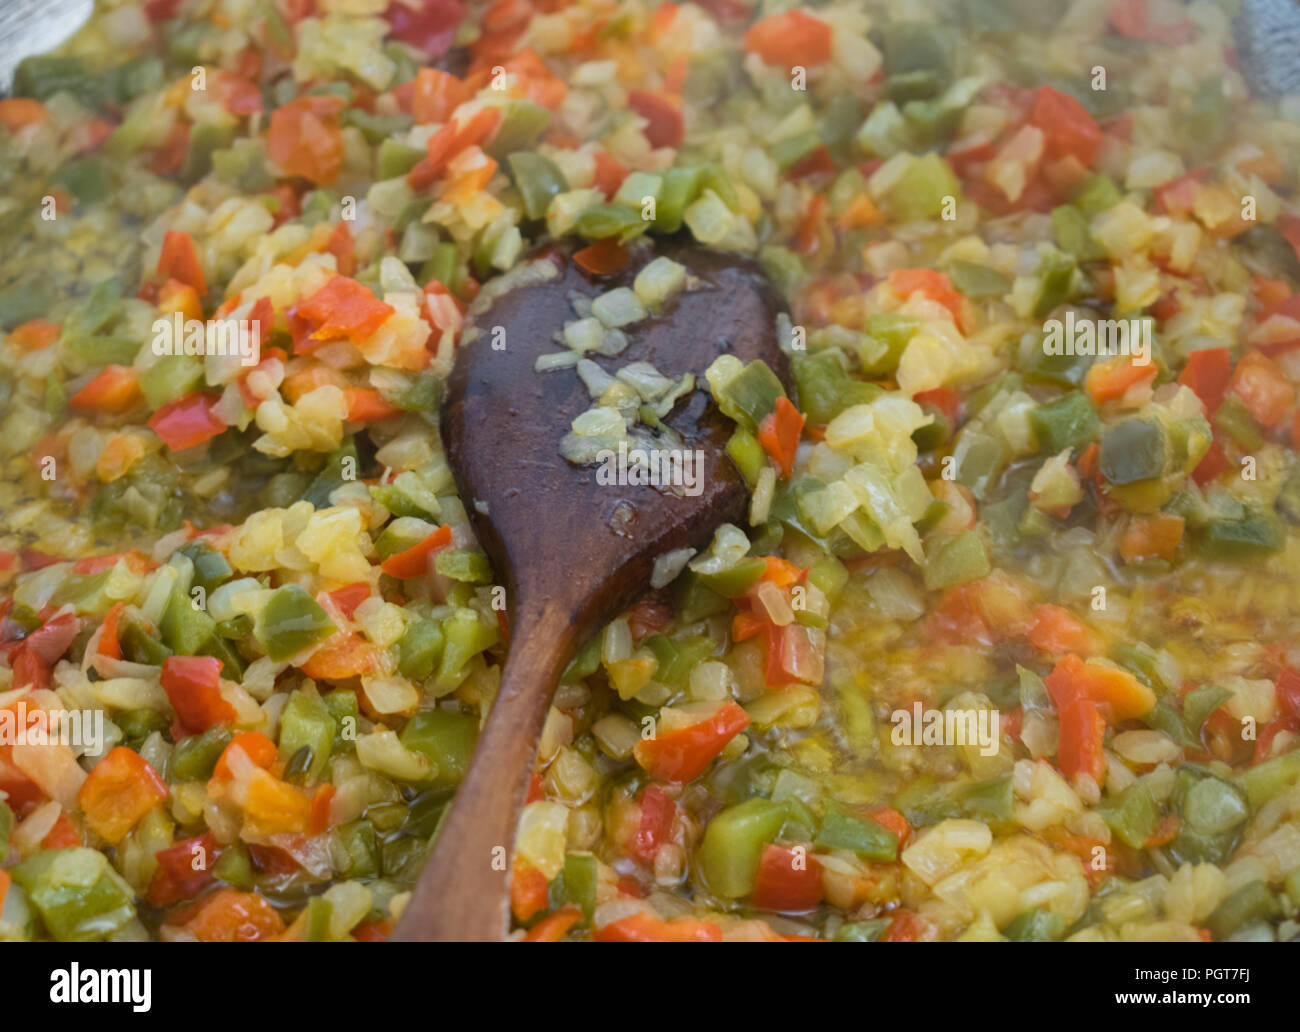 Stir-fried red pepper, green and onion Stock Photo